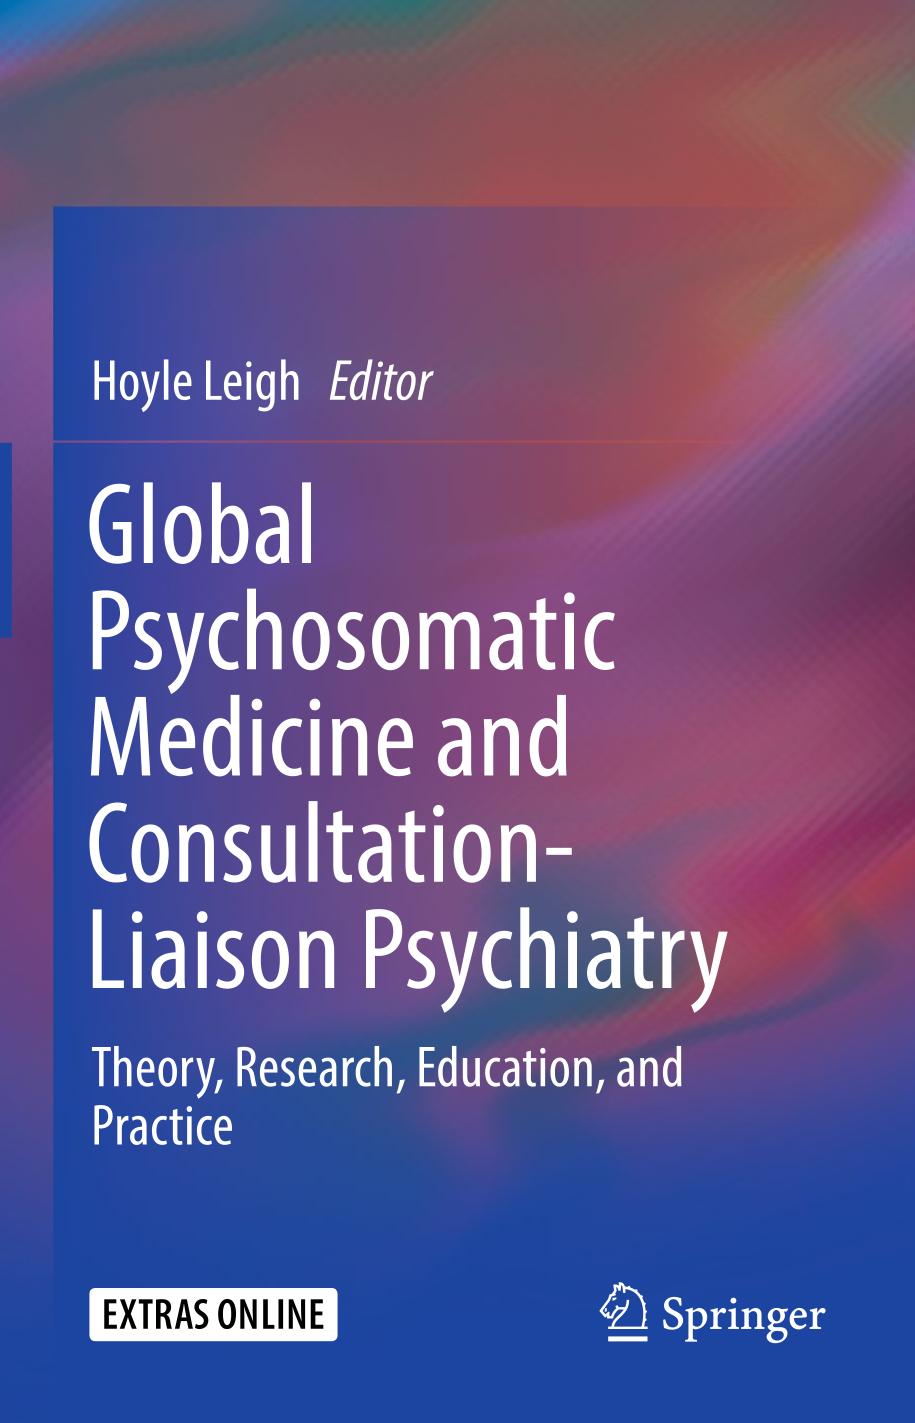 Global psychosomatic medicine and consultation-liaison psychiatry : theory, research, education, and practice